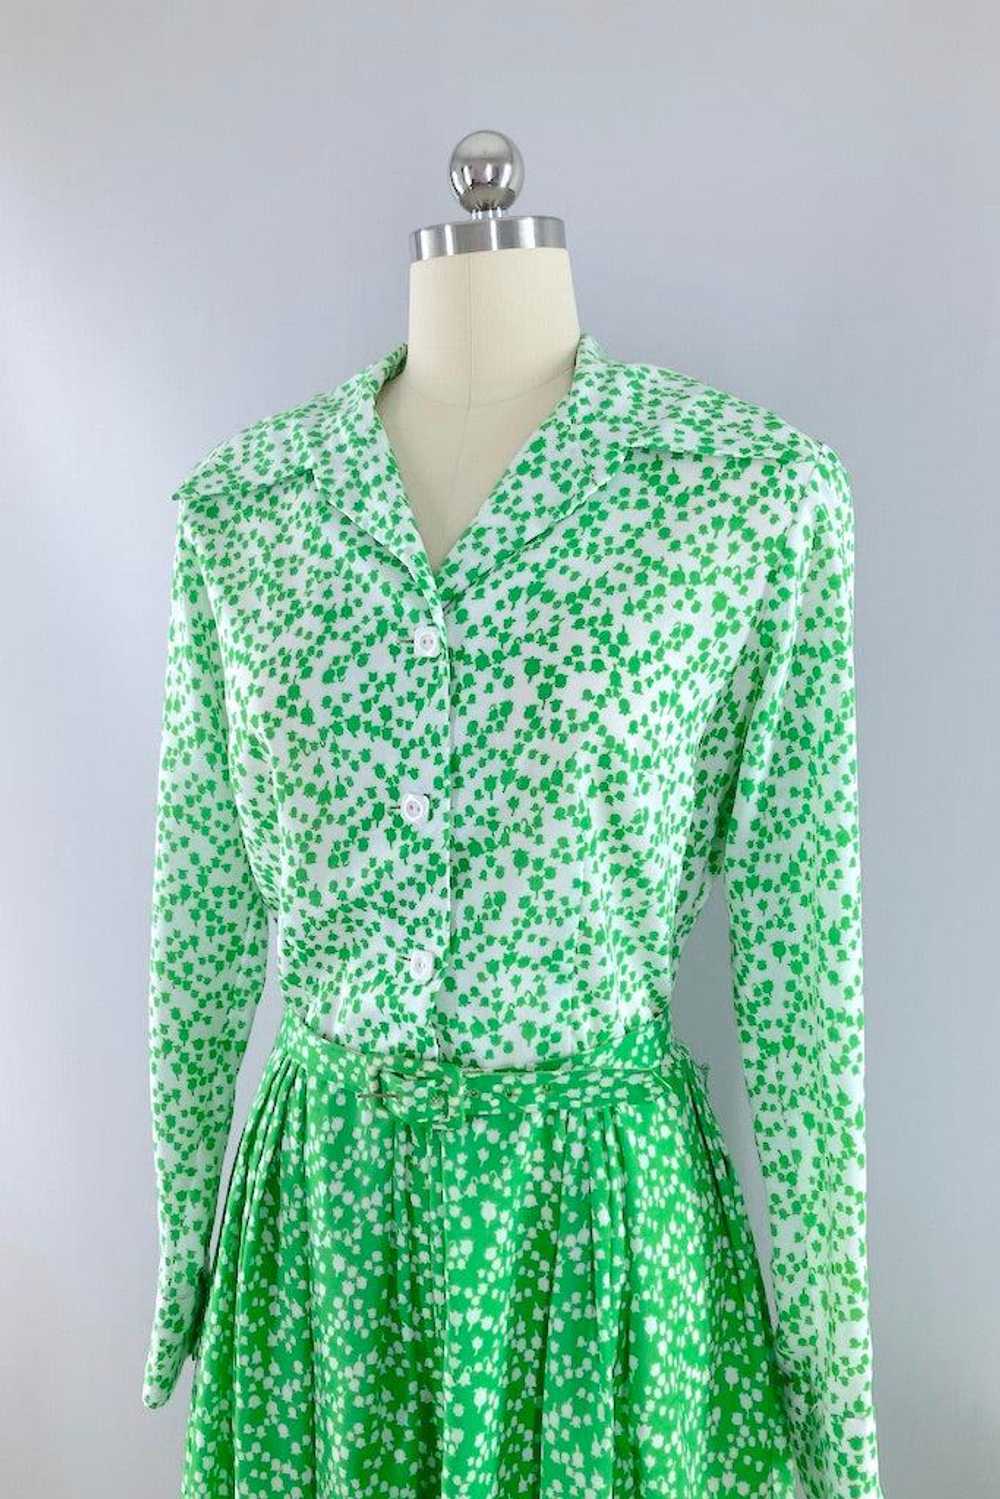 Vintage 70s Green Tulips Day Dress - image 2